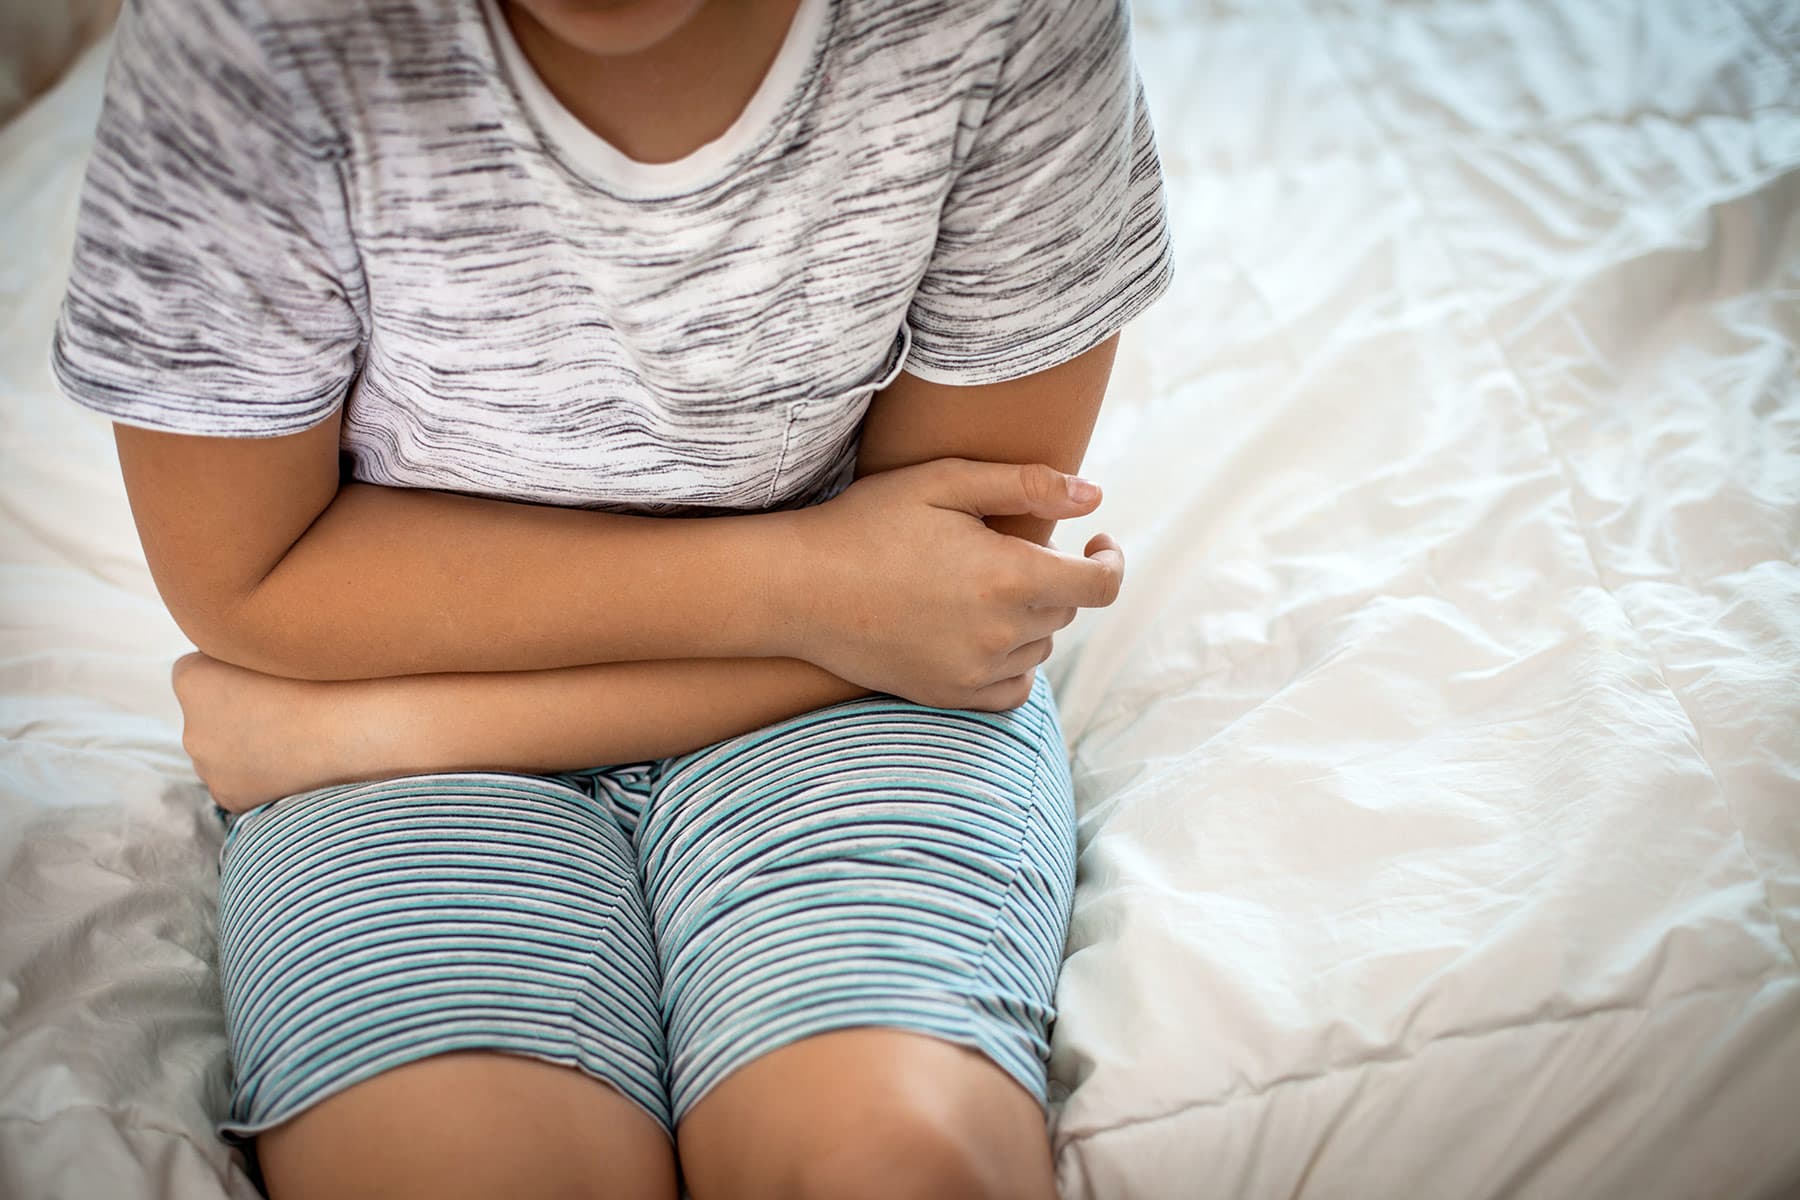 Parents Encouraged to Keep Kids Home if Sick With GI Bugs